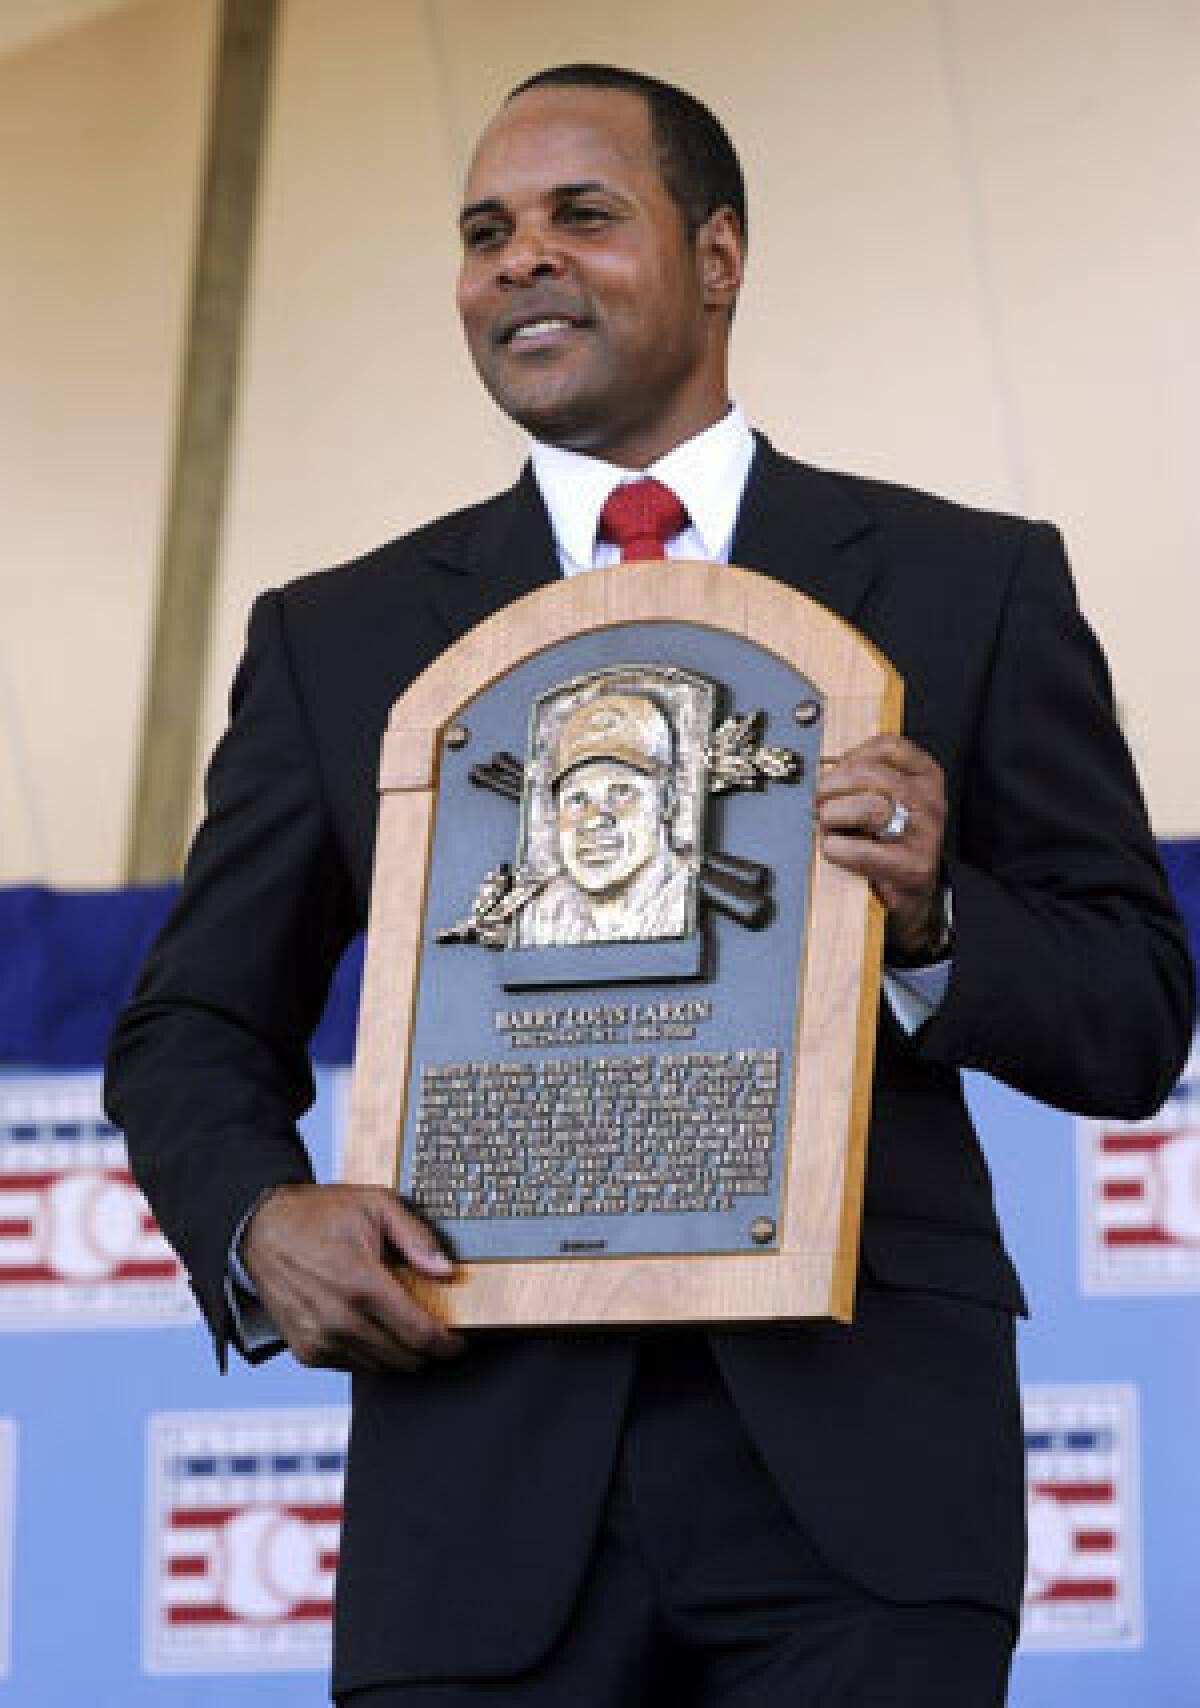 Former Cincinnati Reds star Barry Larkin holds his plaque after his induction into the Hall of Fame.